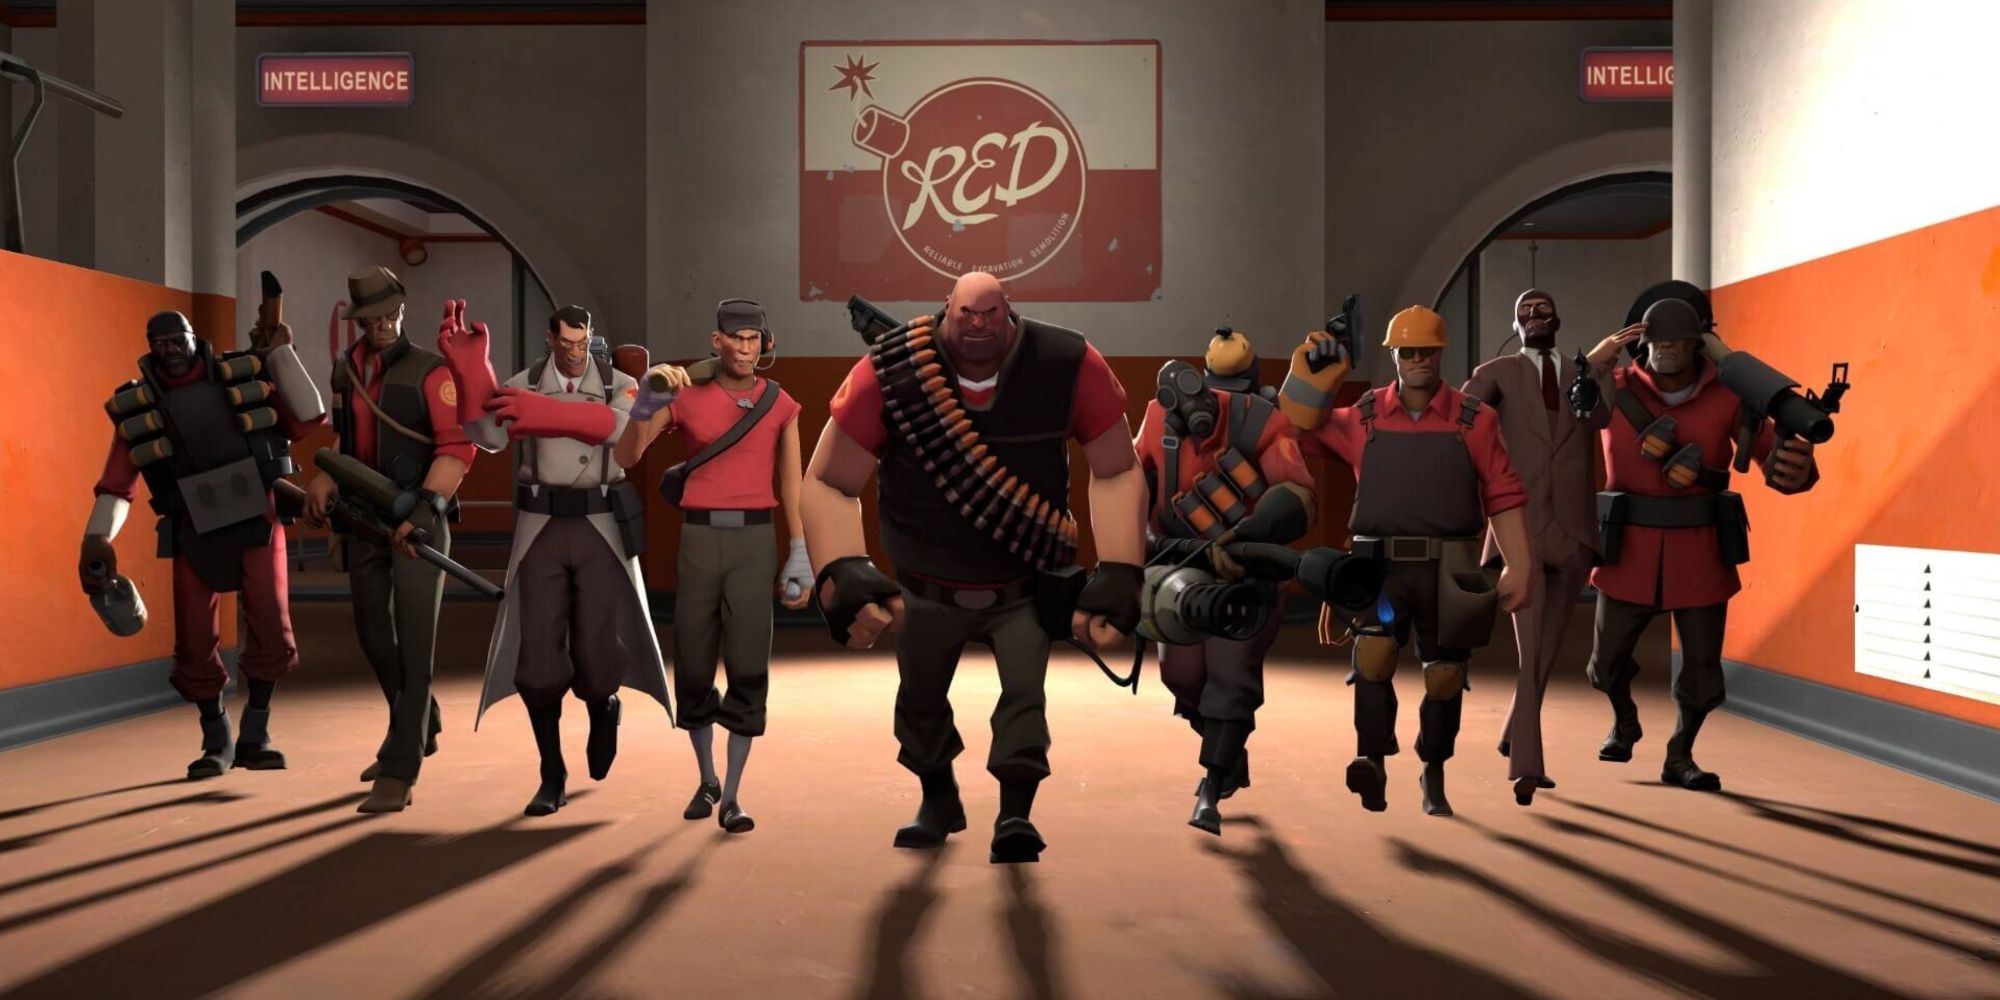 All 9 playable characters on the Red team